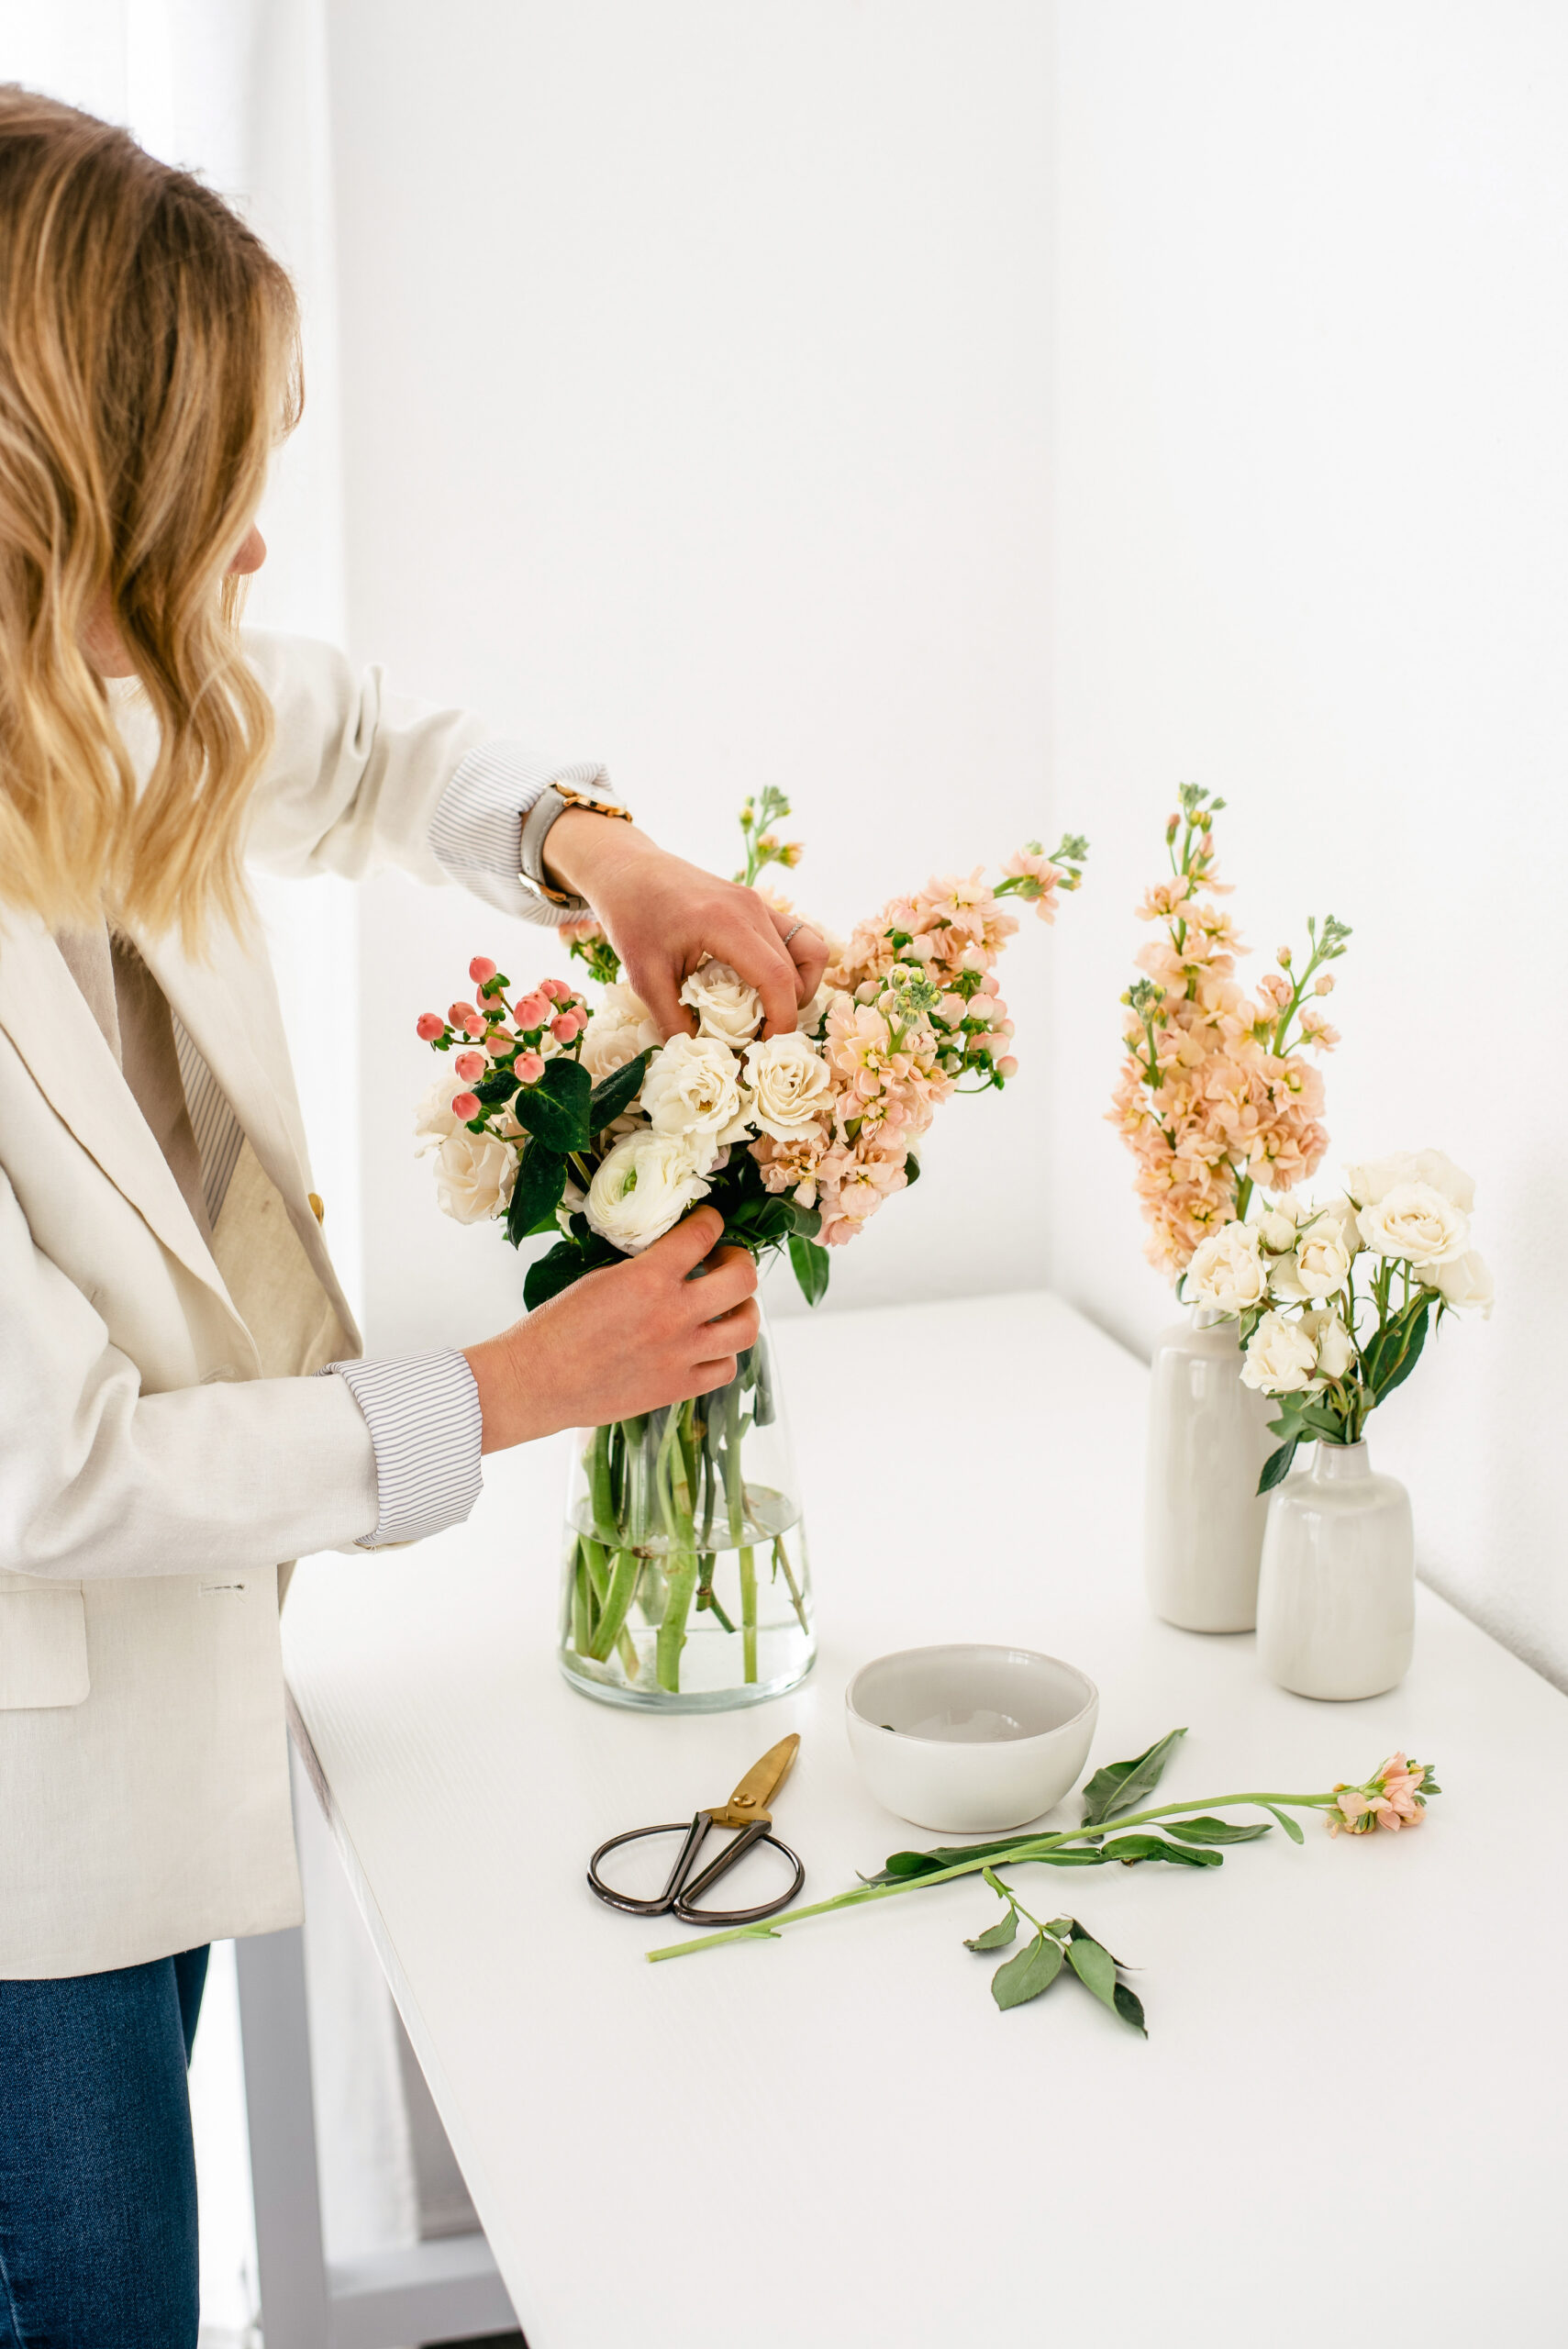 This image shows a woman arranging a bouquet of flowers. In this episode, author Grace Wabuke Klein talks about flourishing in any season of life.